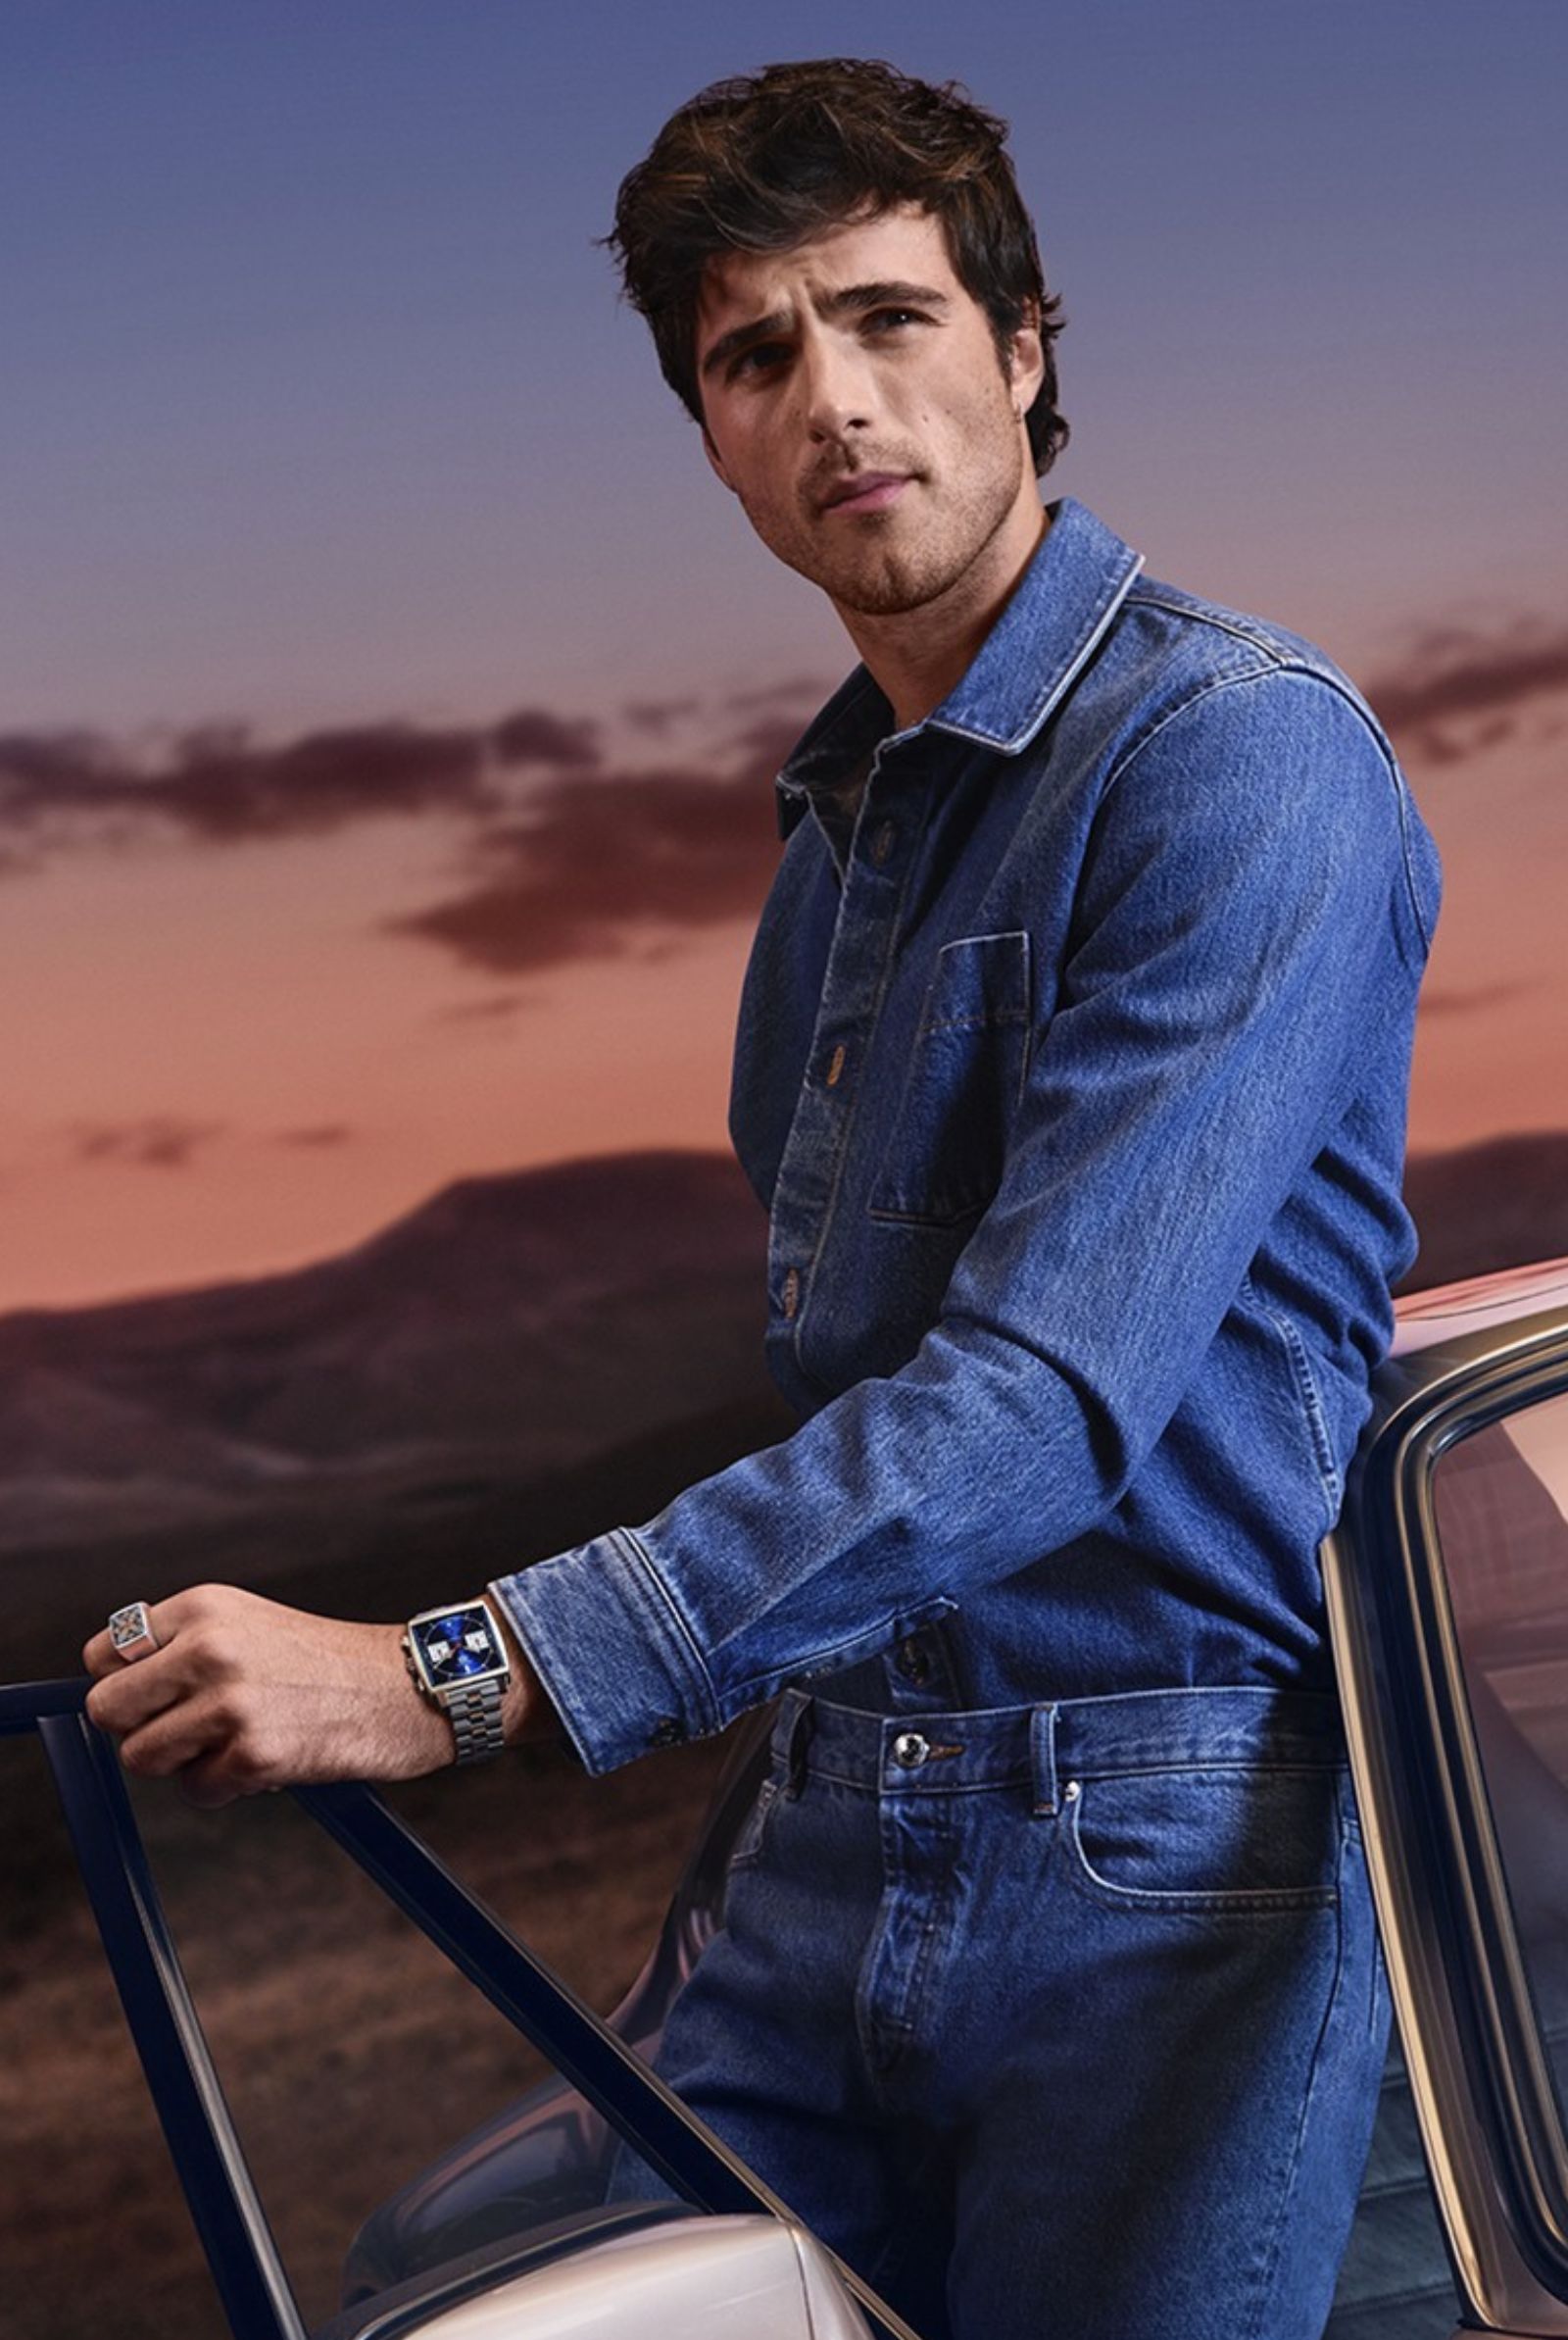 Jacob Elordi for TAG HEUER